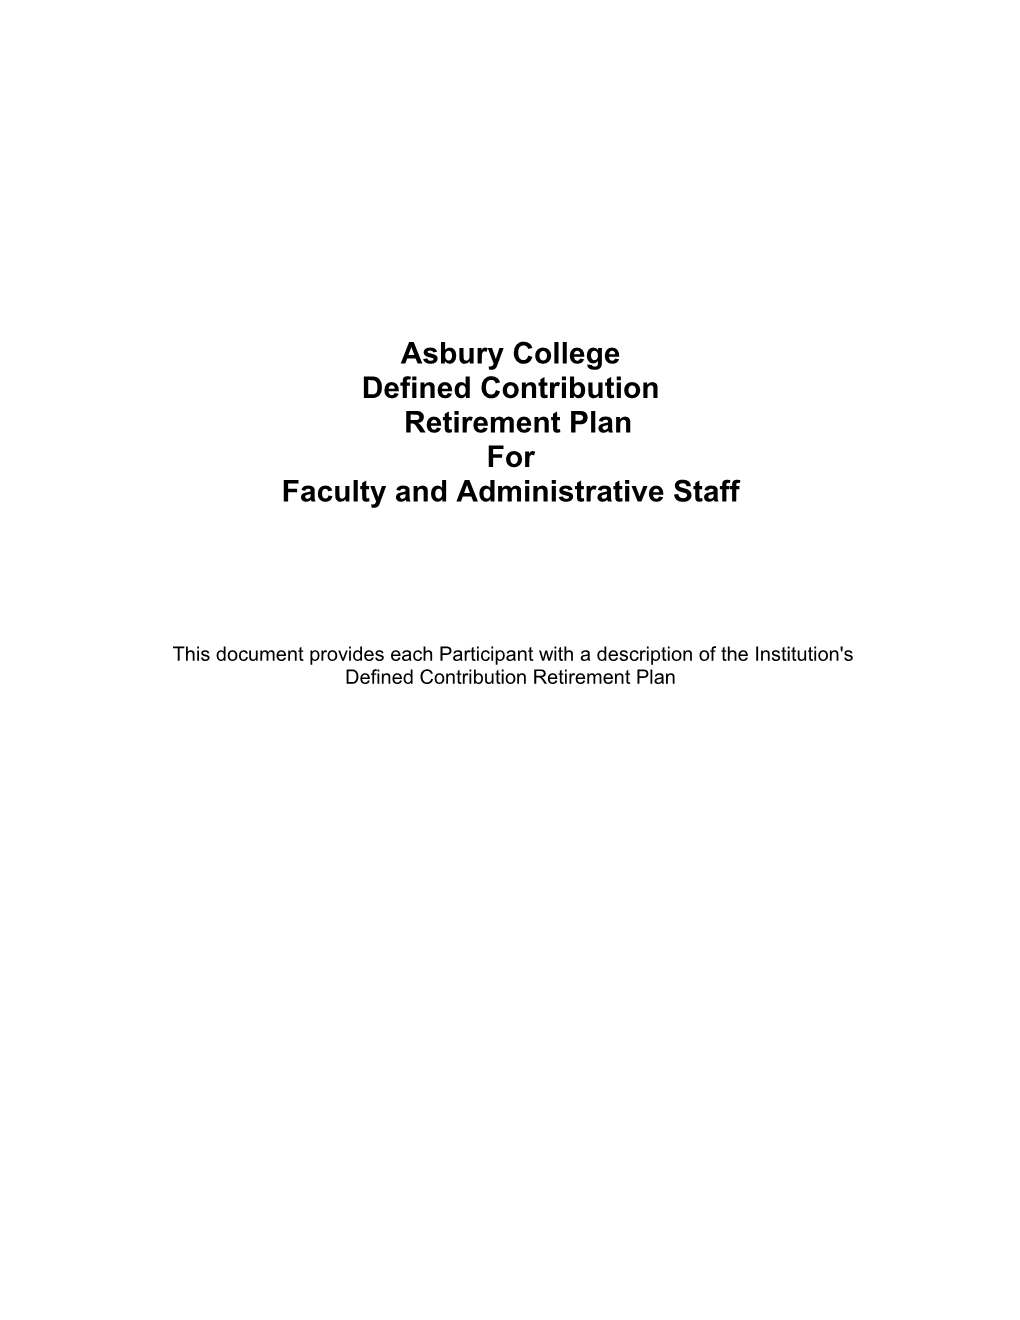 Asbury College Defined Contribution